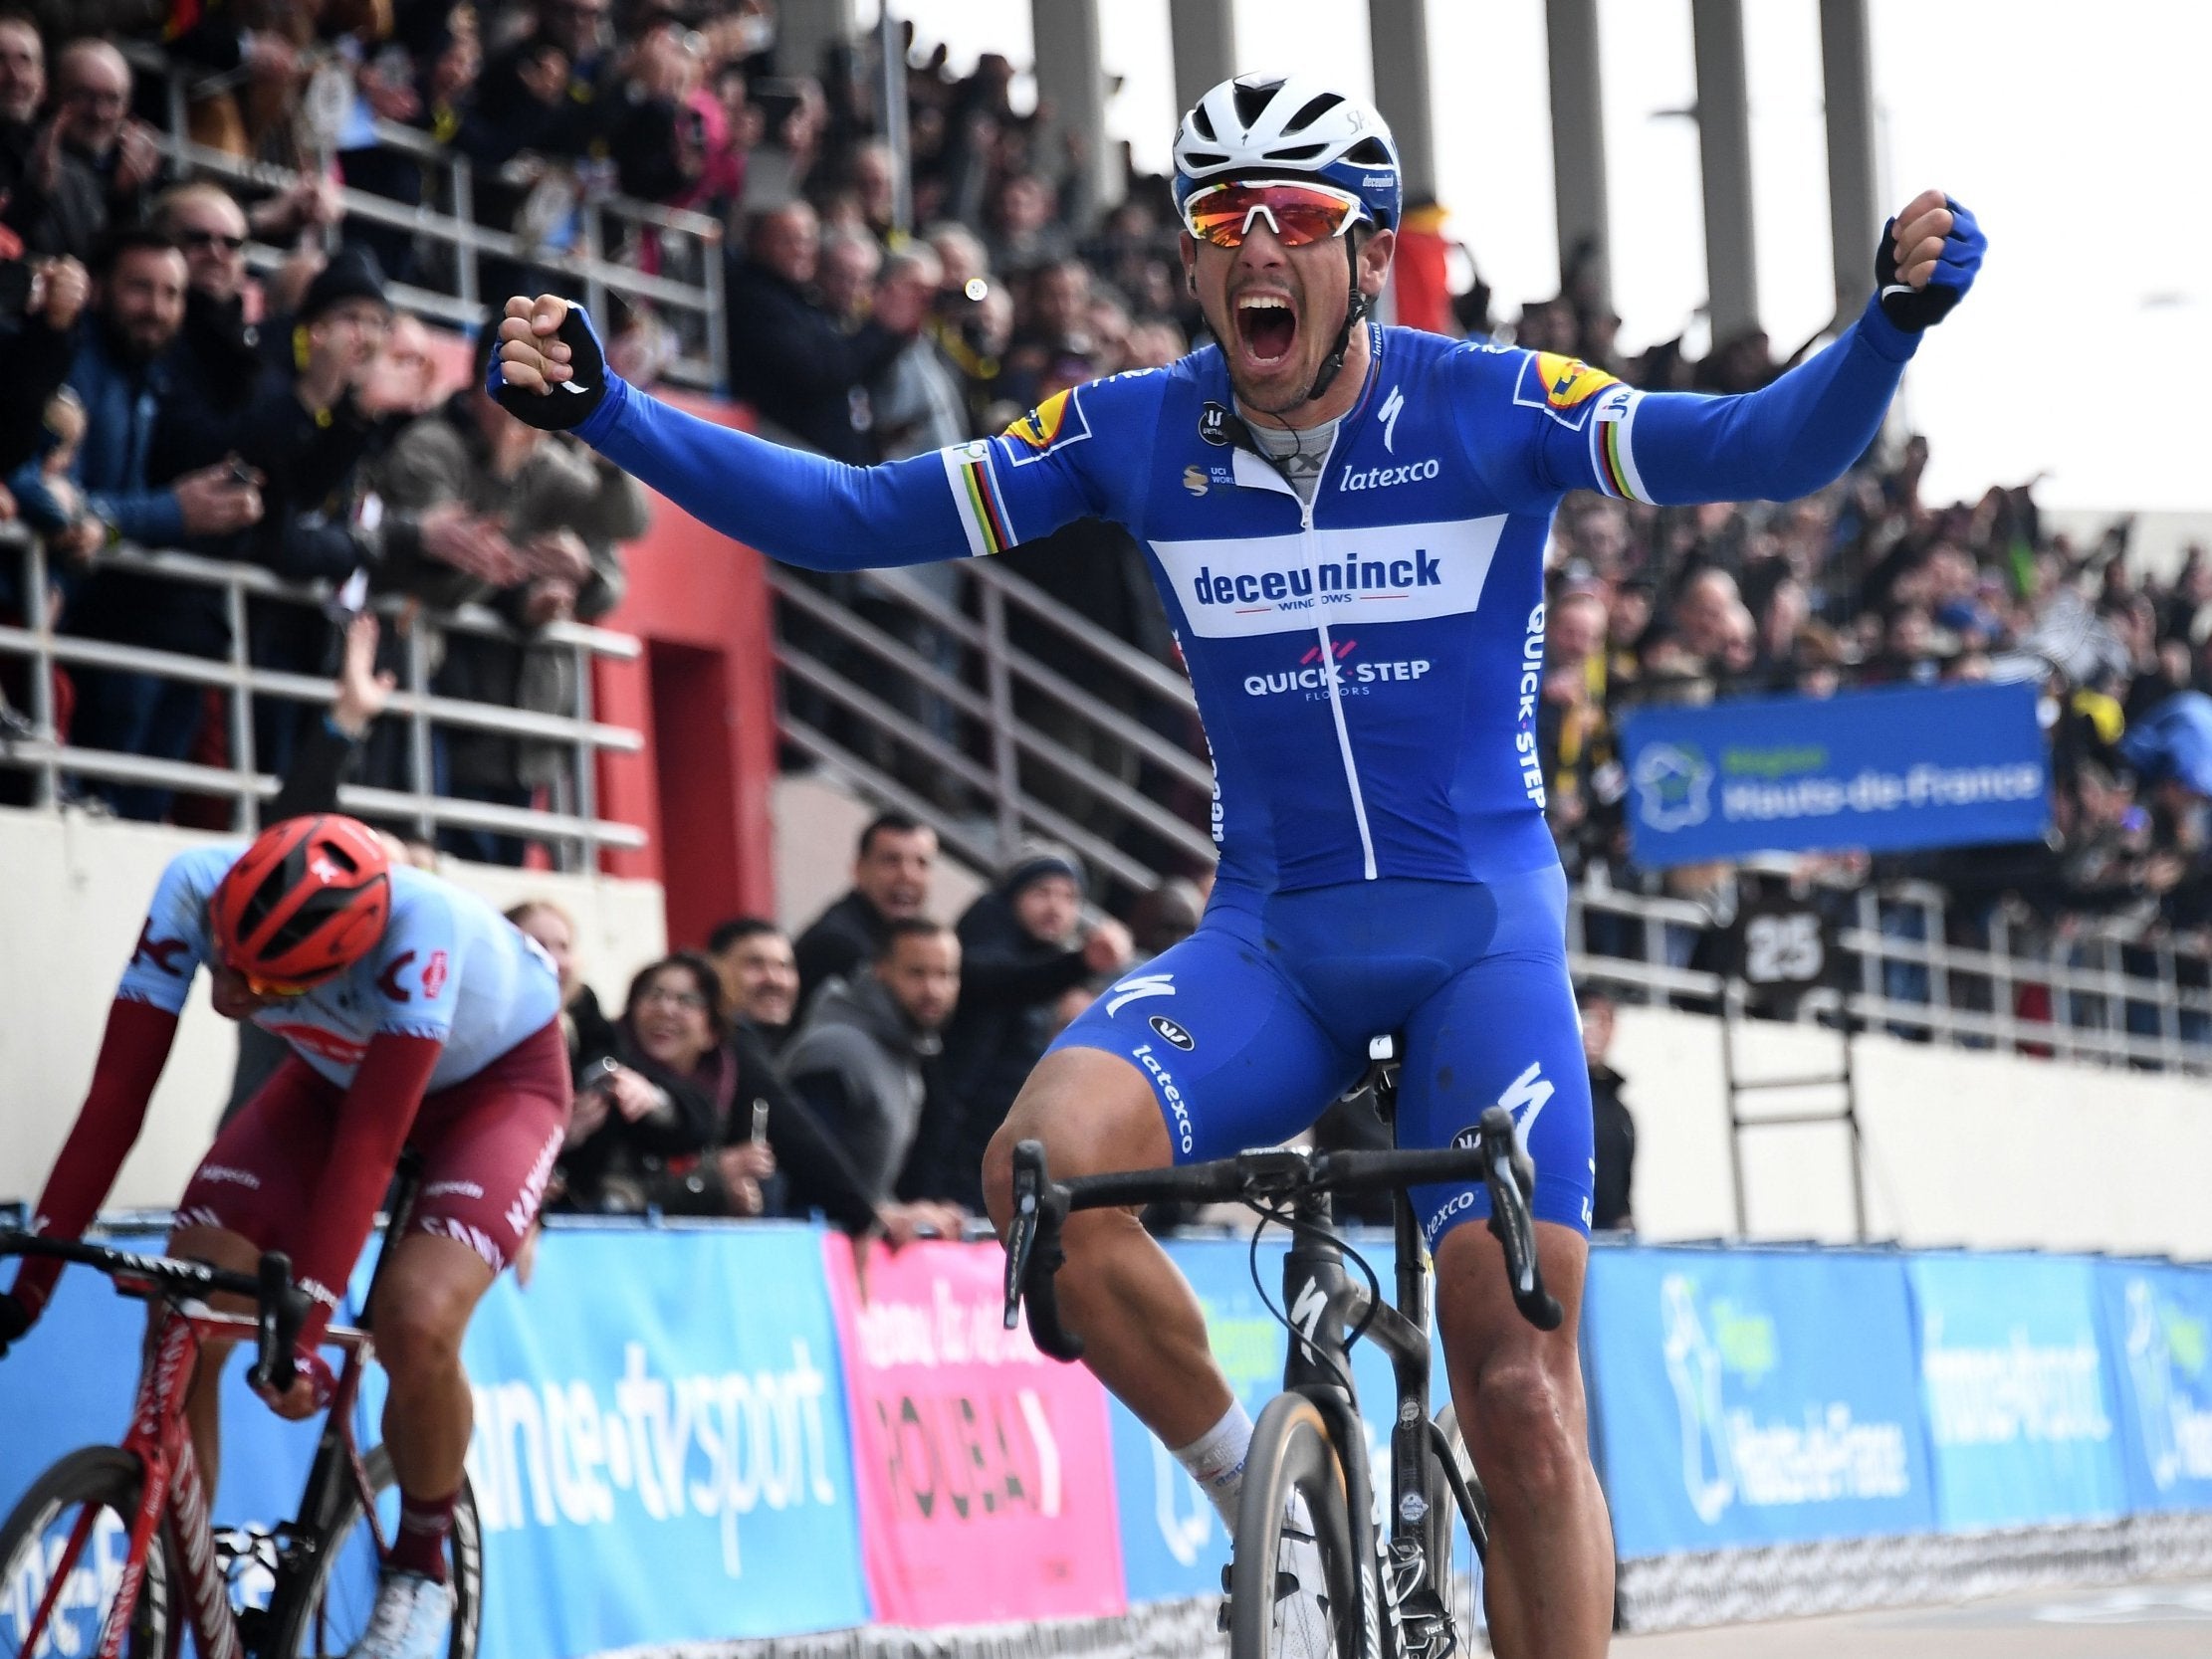 Paris-Roubaix 2019: Philippe Gilbert wins Hell of the North as Peter Sagan finishes fifth